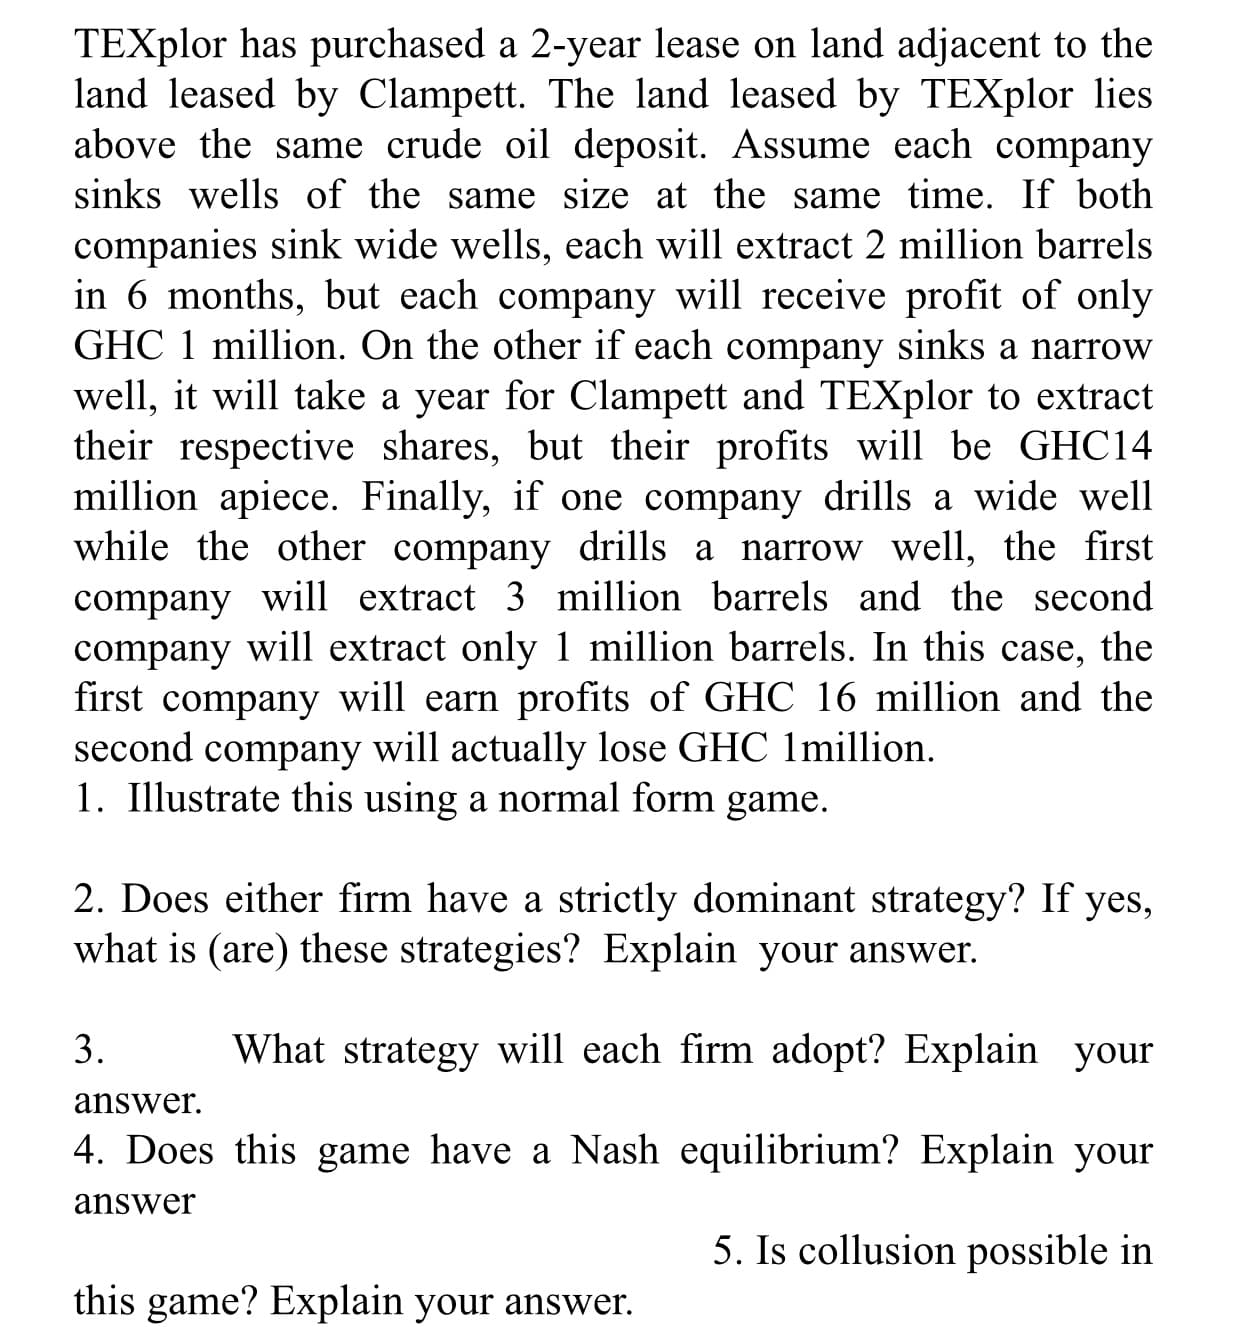 TEXplor has purchased a 2-year lease on land adjacent to the
land leased by Clampett. The land leased by TEXplor lies
above the same crude oil deposit. Assume each company
sinks wells of the same size at the same time. If both
companies sink wide wells, each will extract 2 million barrels
in 6 months, but each company will receive profit of only
GHC 1 million. On the other if each company sinks a narrow
well, it will take a year for Clampett and TEXplor to extract
their respective shares, but their profits will be GHC14
million apiece. Finally, if one company drills a wide well
while the other company drills a narrow well, the first
company will extract 3 million barrels and the second
company will extract only 1 million barrels. In this case, the
first company will earn profits of GHC 16 million and the
second company will actually lose GHC 1million.
1. Illustrate this using a normal form game.
2. Does either firm have a strictly dominant strategy? If yes,
what is (are) these strategies? Explain your answer.
3.
What strategy will each firm adopt? Explain your
answer.
